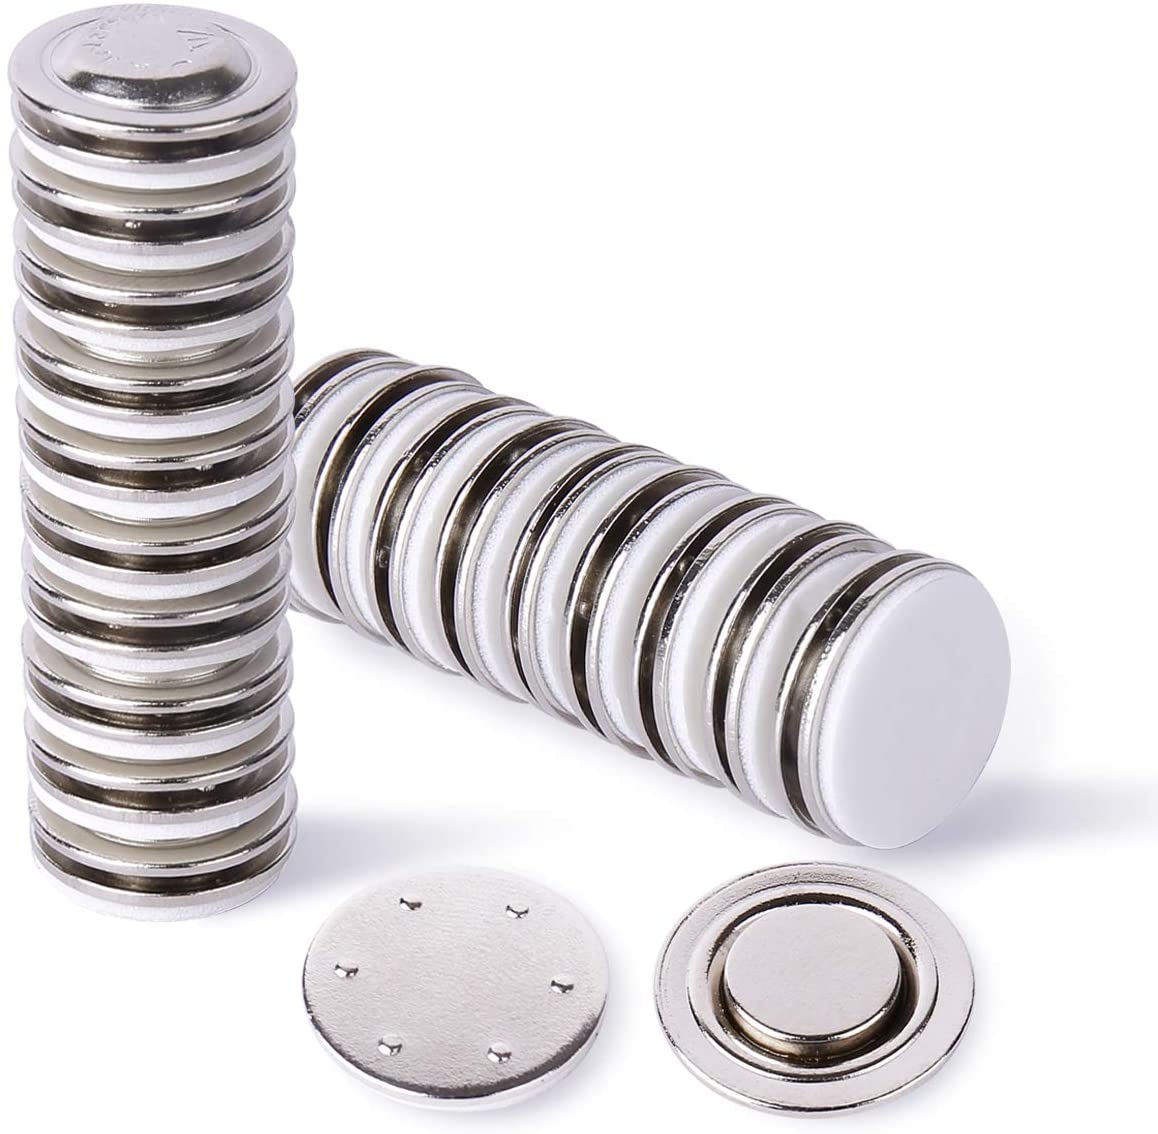 Bulk 50 Pack - Small Round Button & Badge Magnets - Strong